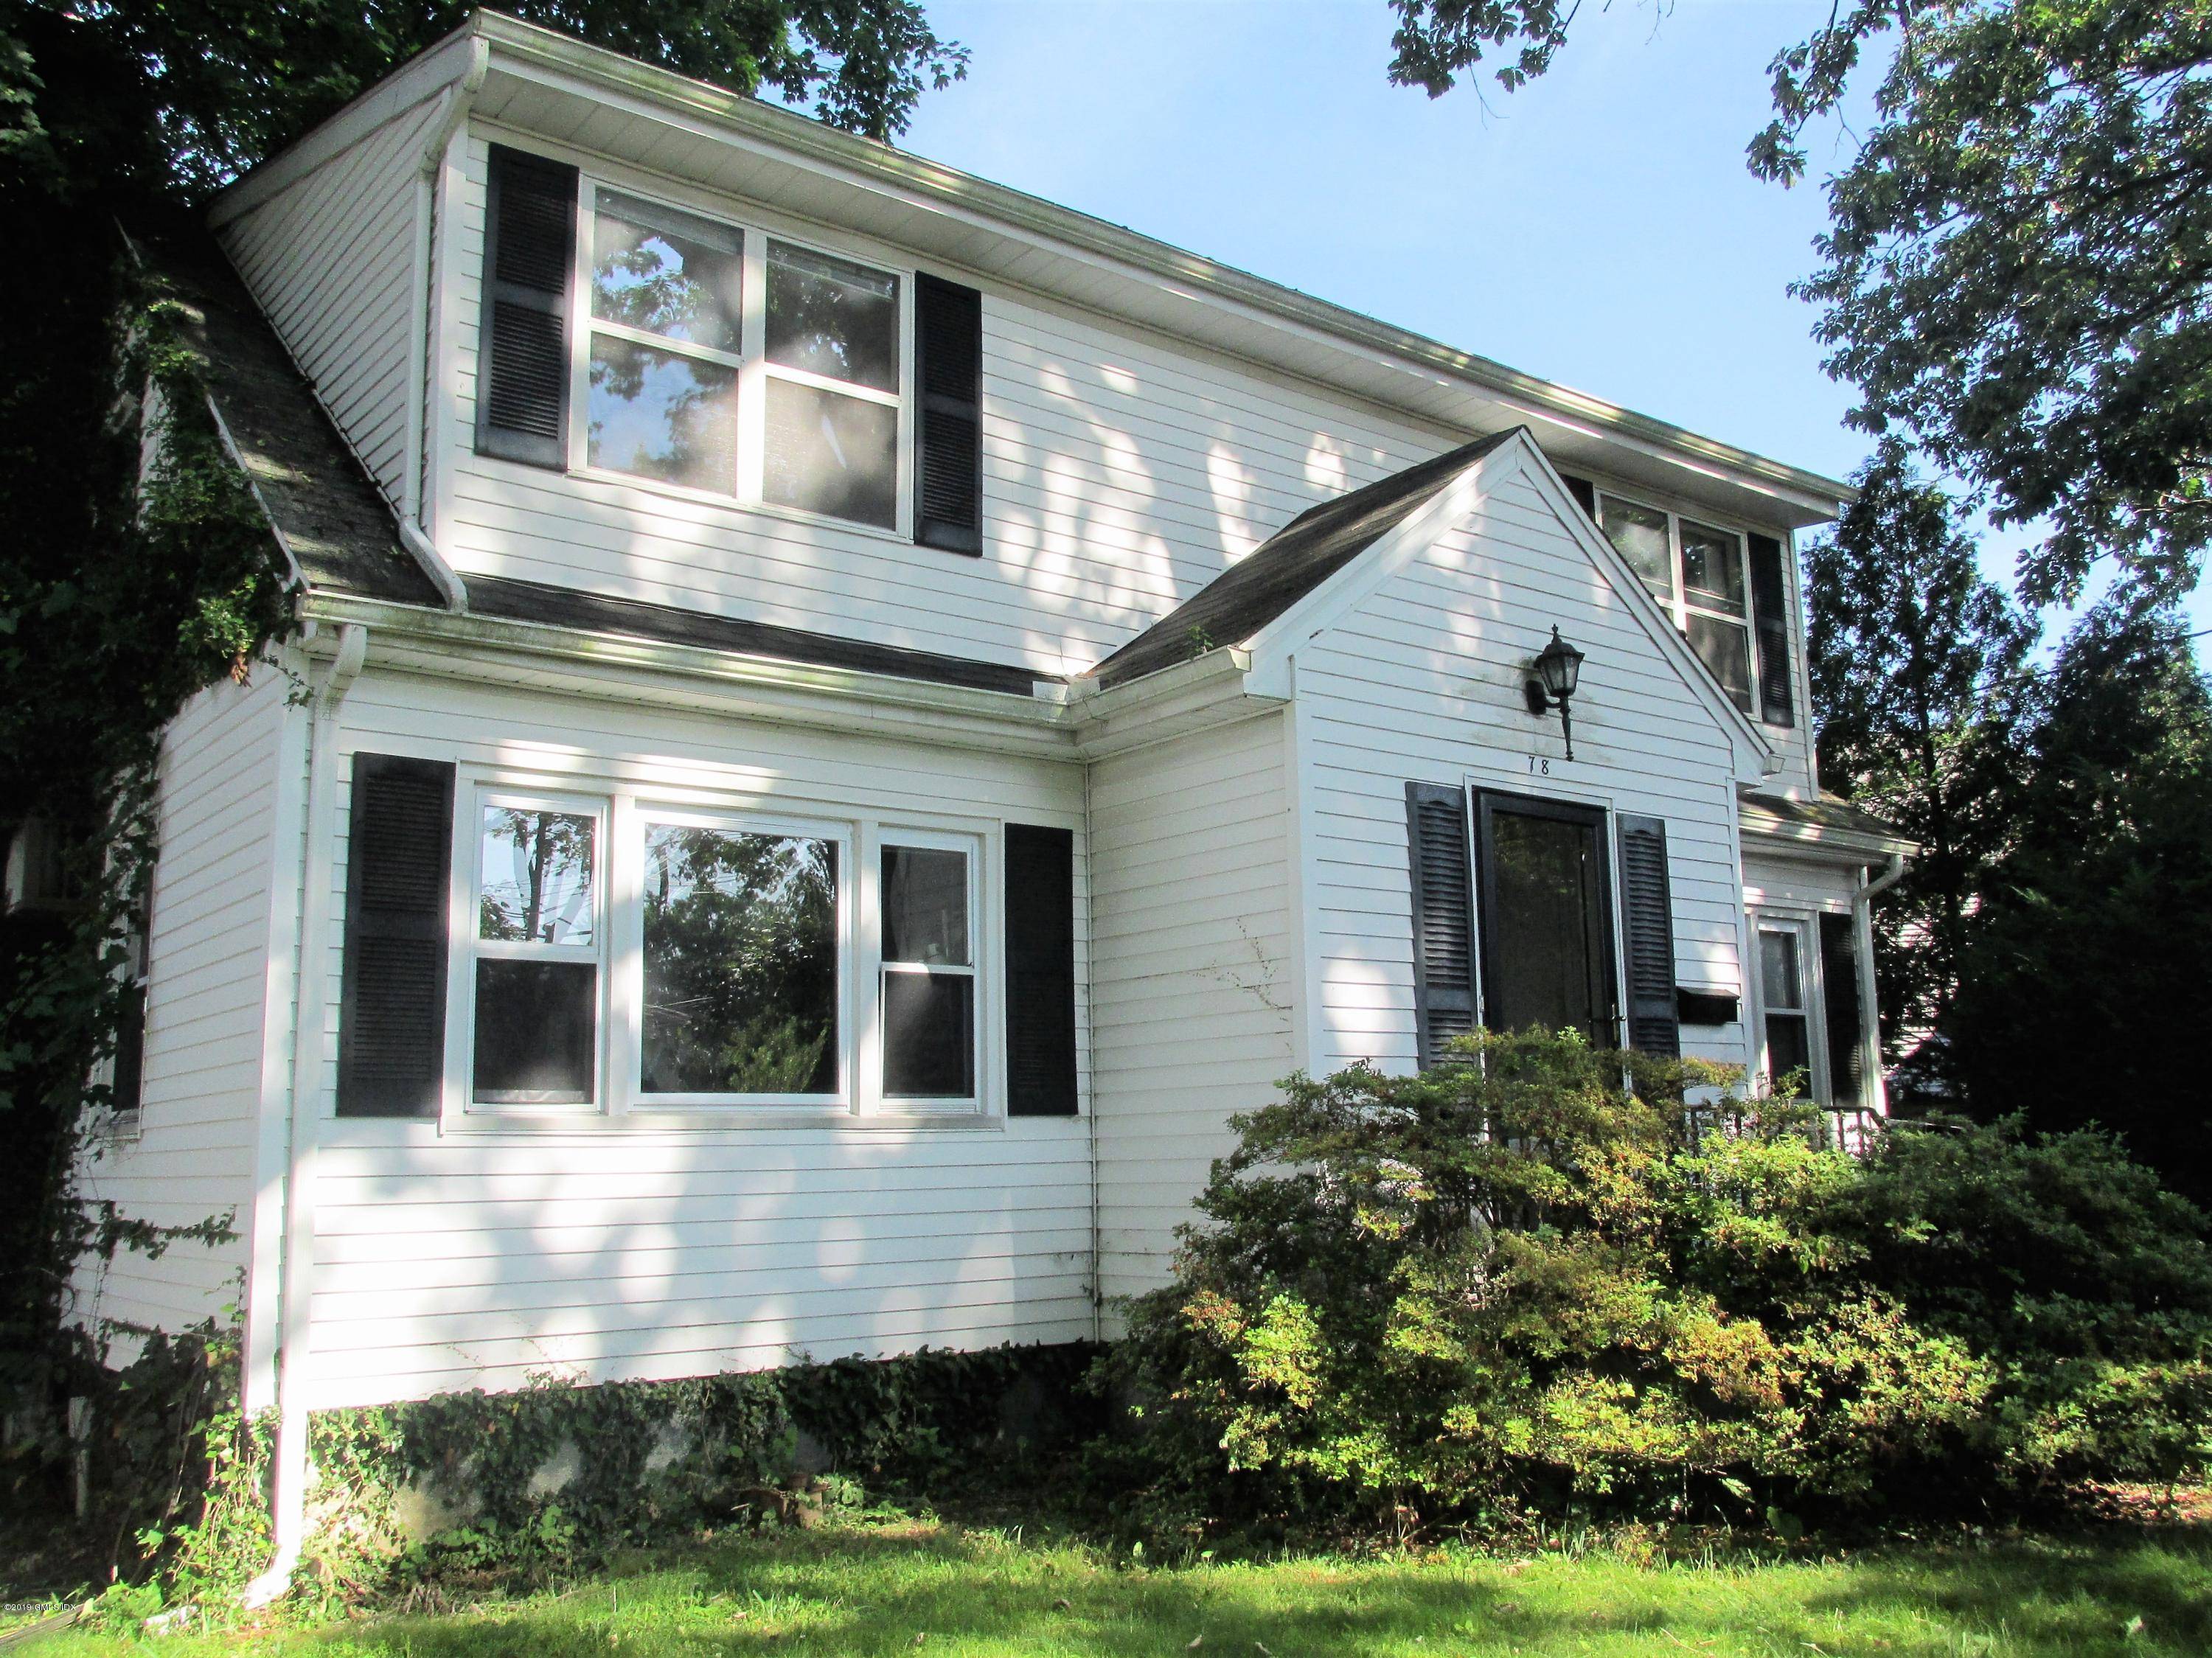 Excellent value in heart of Cos Cob wonderful family oriented neighborhood.